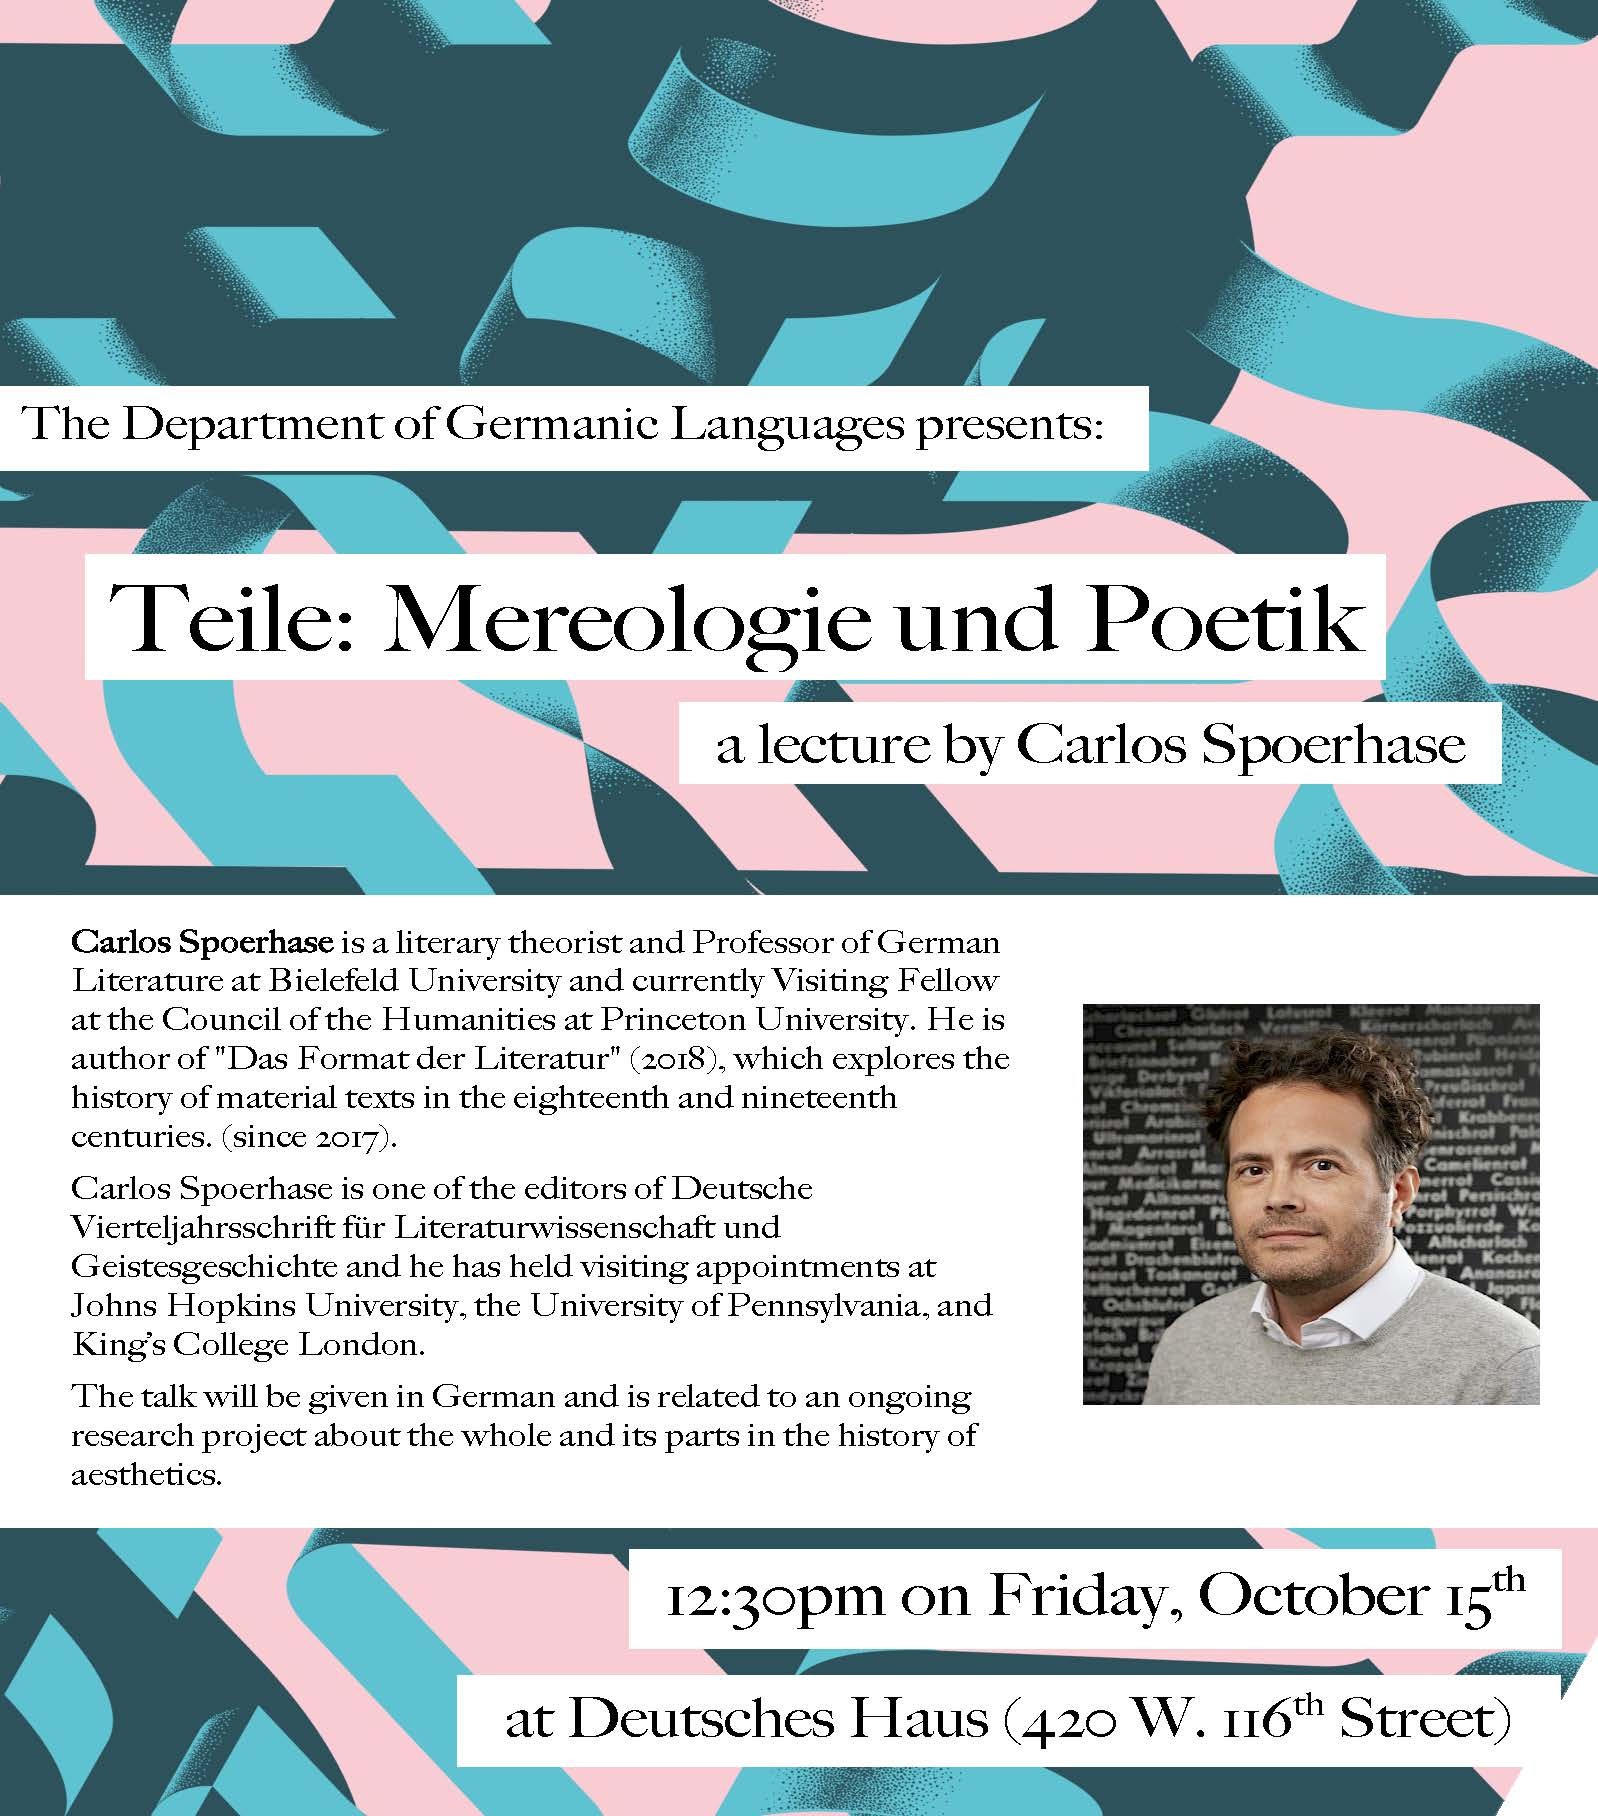 10/15/2021, Guest lecture by Carlos Spoerhase